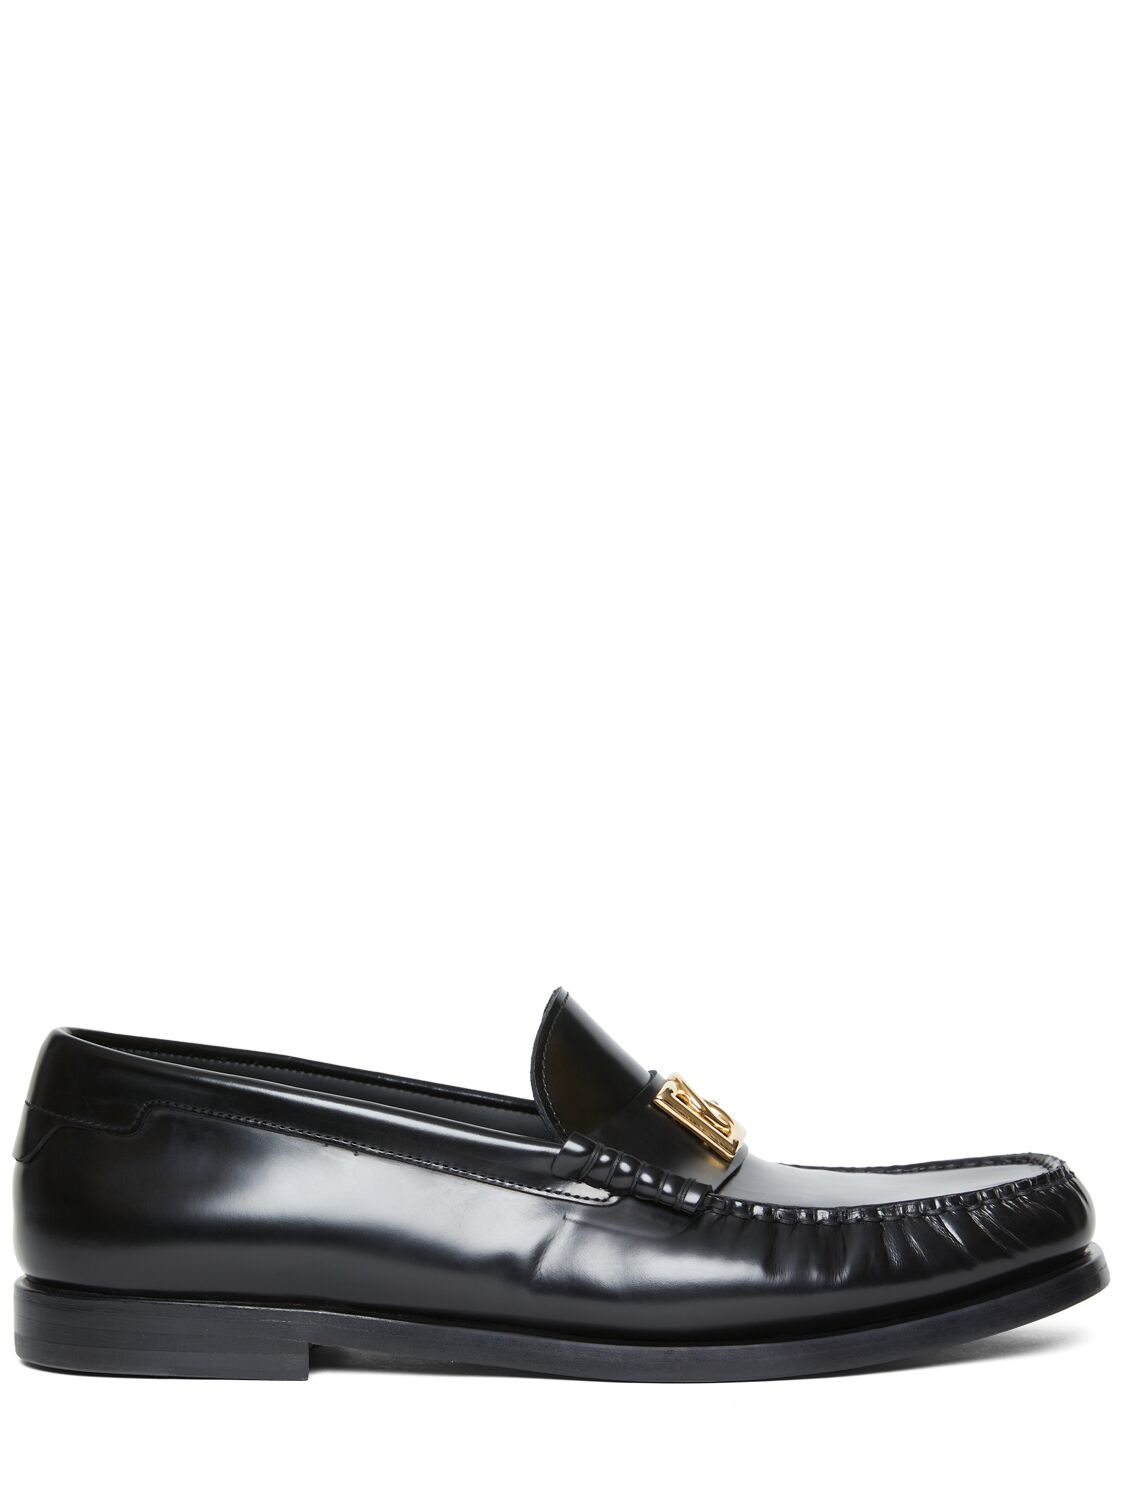 Dolce & Gabbana City Blanco Leather Loafers In Black